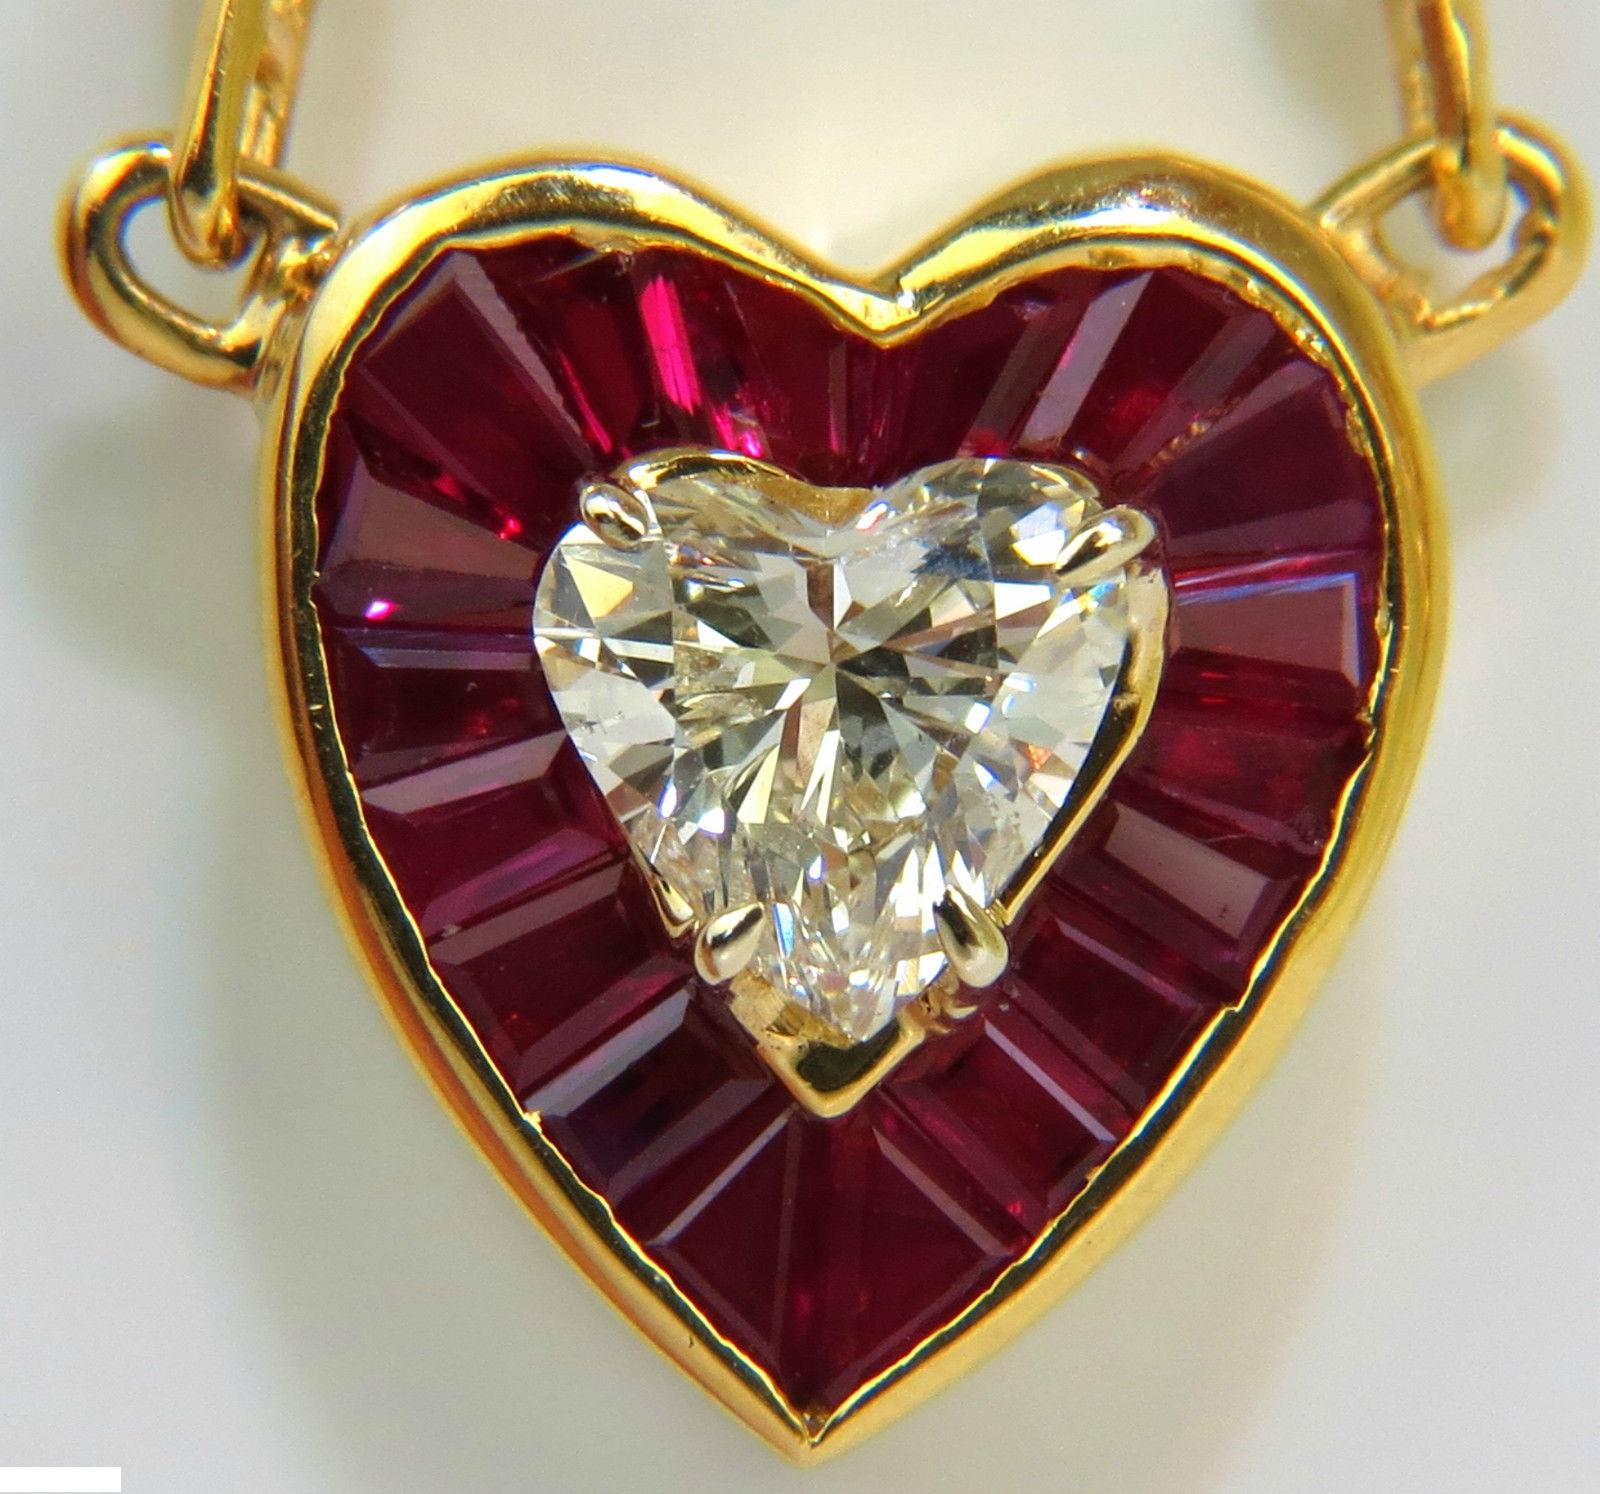 Excellence of Hand Craft


Brilliant cut heart with custom made casing

.86ct. I-color, Vs-2 clarity

Brilliant fully faceted

6 X 6.2mm



1.50ct. Natural Rubies

Baguettes cut to custom fit grooves

Clean Clarity

Classic pigeon blood